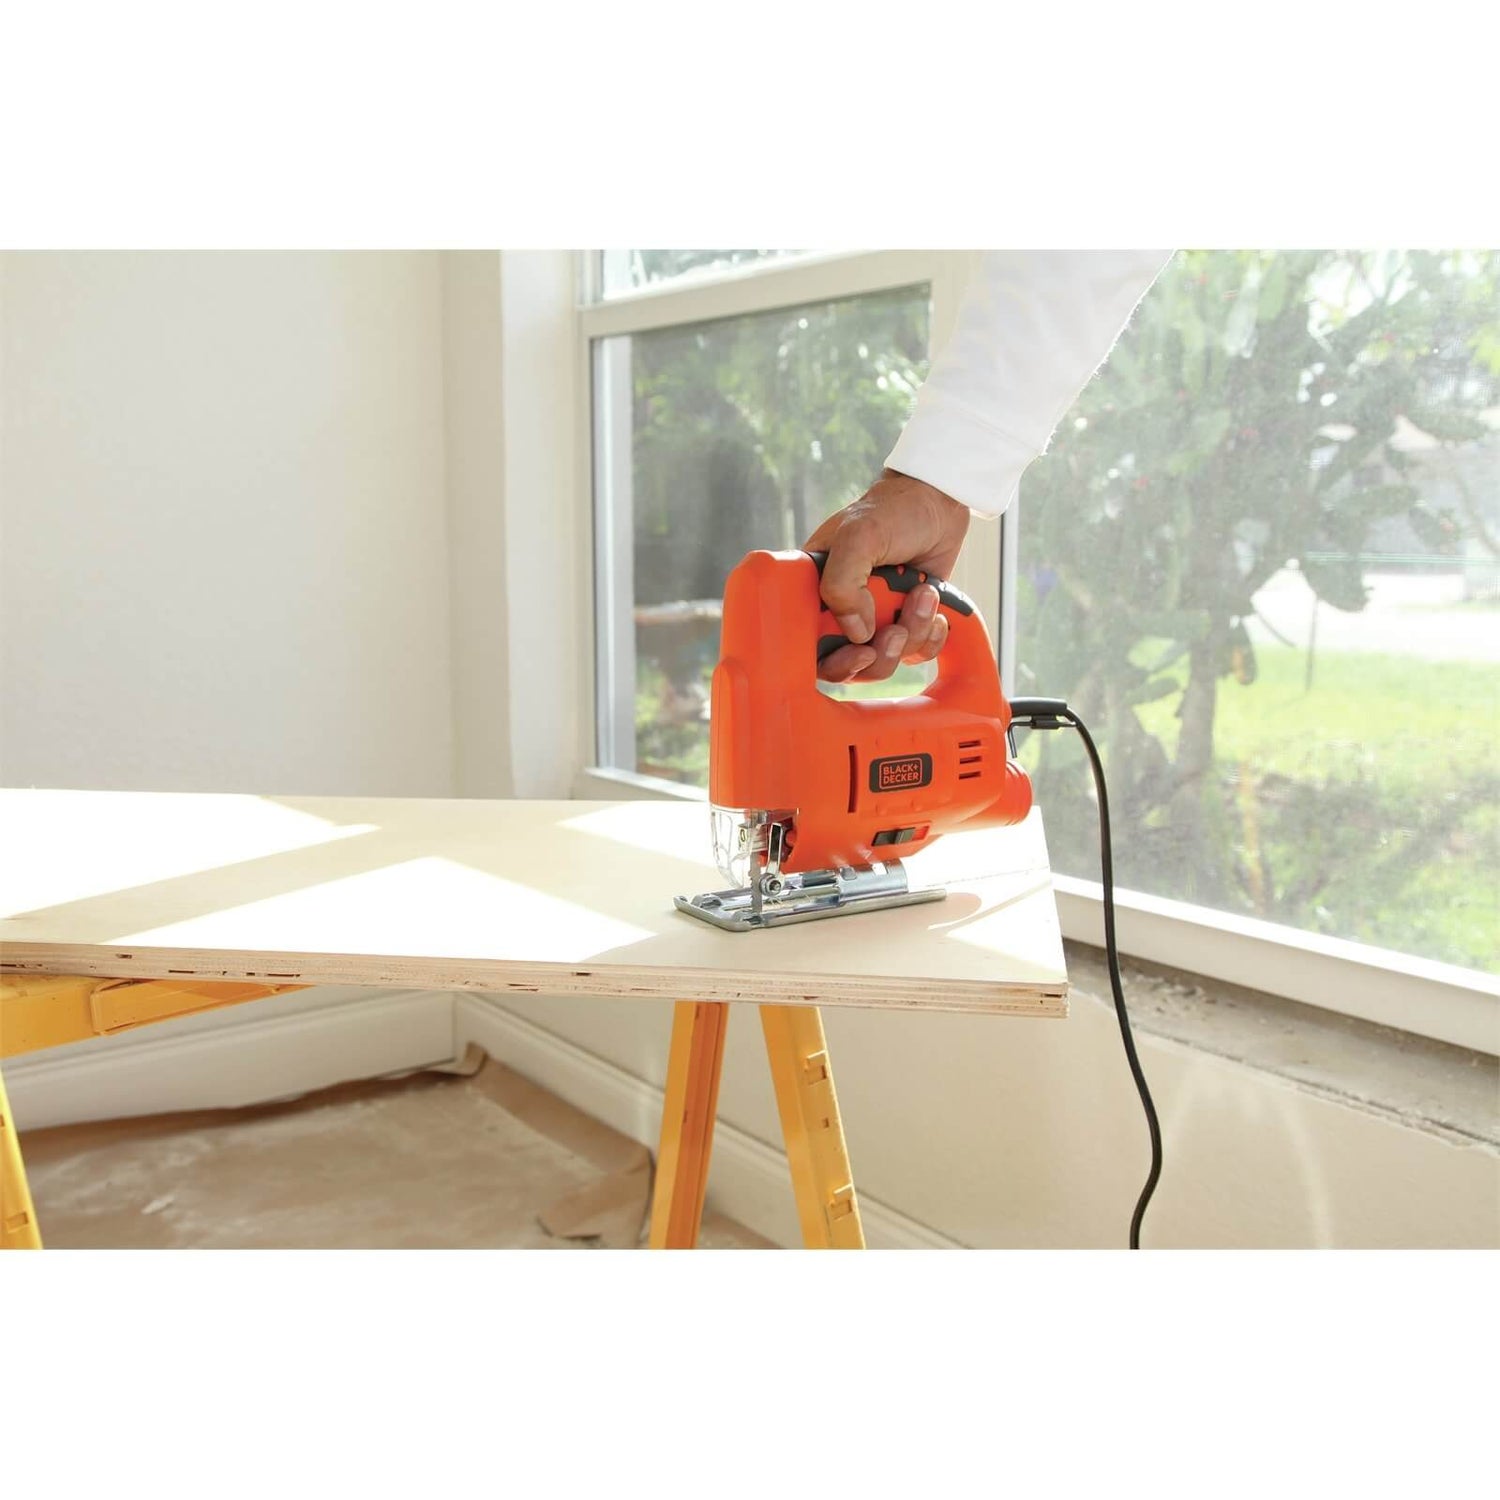 Unboxing Black and Decker KS501 400W Compact Jigsaw with blade